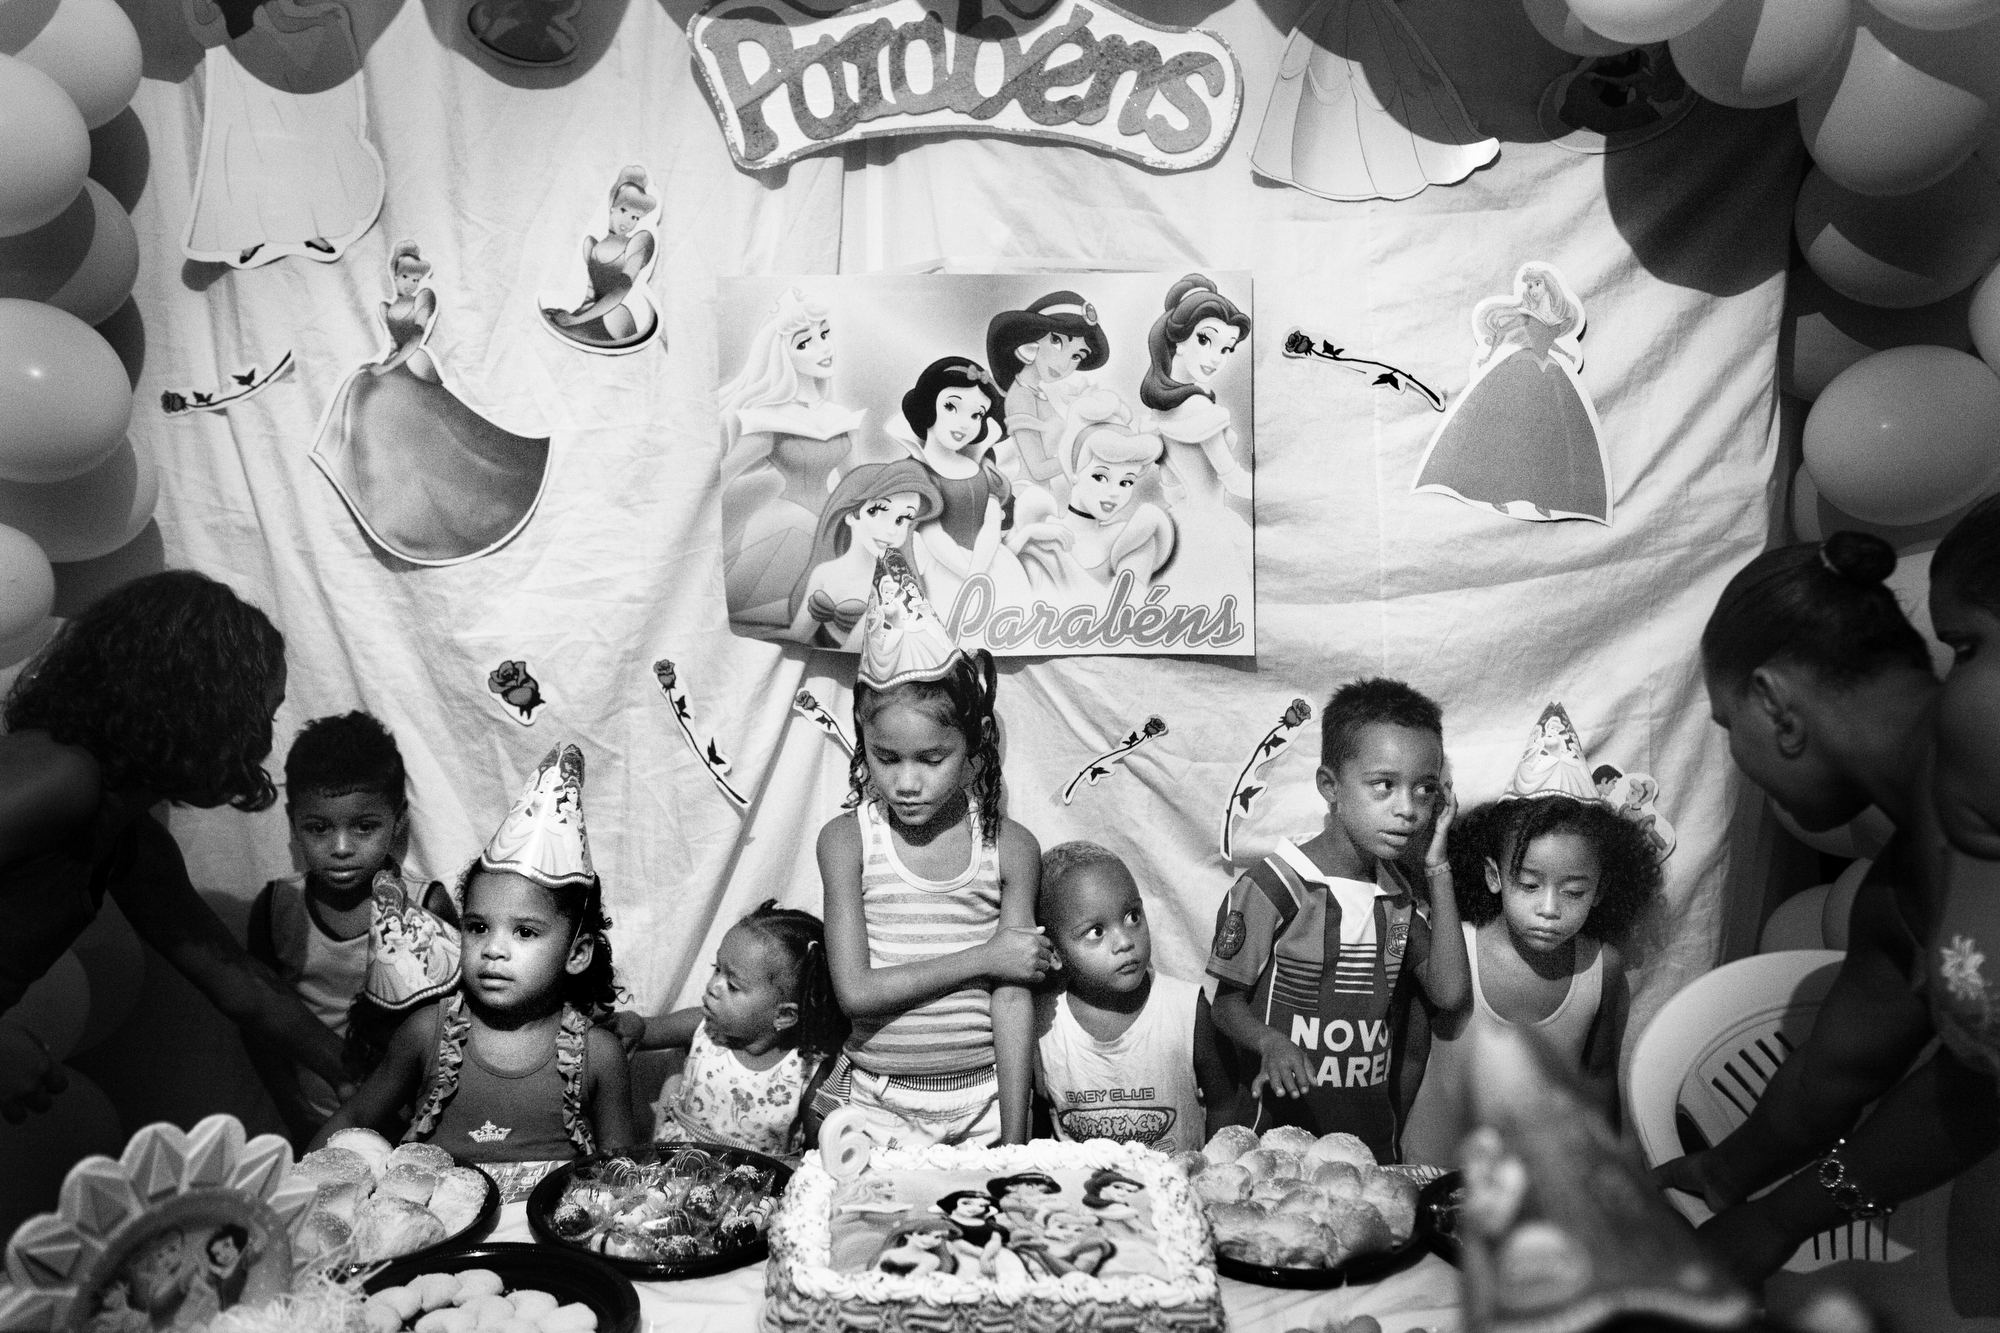 Sebastian Liste won the Alexia grant for his project, "The New Culture of Violence in Latin America." Part of this project was commissioned by TIME In this image, Ana celebrates her birthday, Jan. 22, 2011 . She was born and has grown up inside the abandonated chocolate factory in Salvador de Bahia, Brazil. This impoverished community took up residence in an old abandoned chocolate factory on the coast in Salvador de Bahia. Despite the lack of socio-economic support from the government, they have managed to make a safe place for themselves to live, and form a community of their own, which is safer that the alternatives available to them. However they are currently being evicted by the government due to being there illegally.